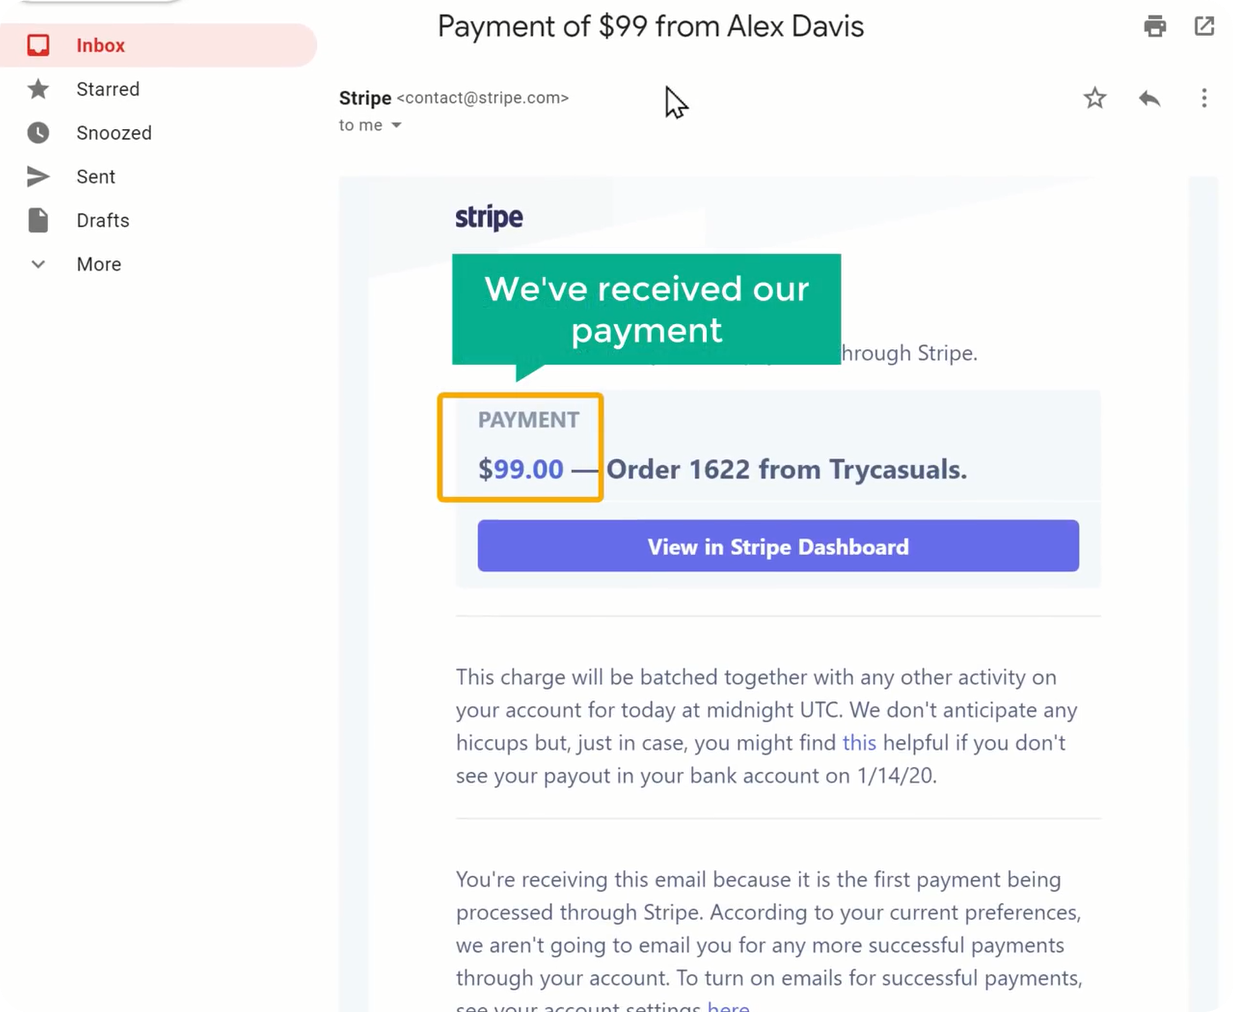 Another Email contains payment details